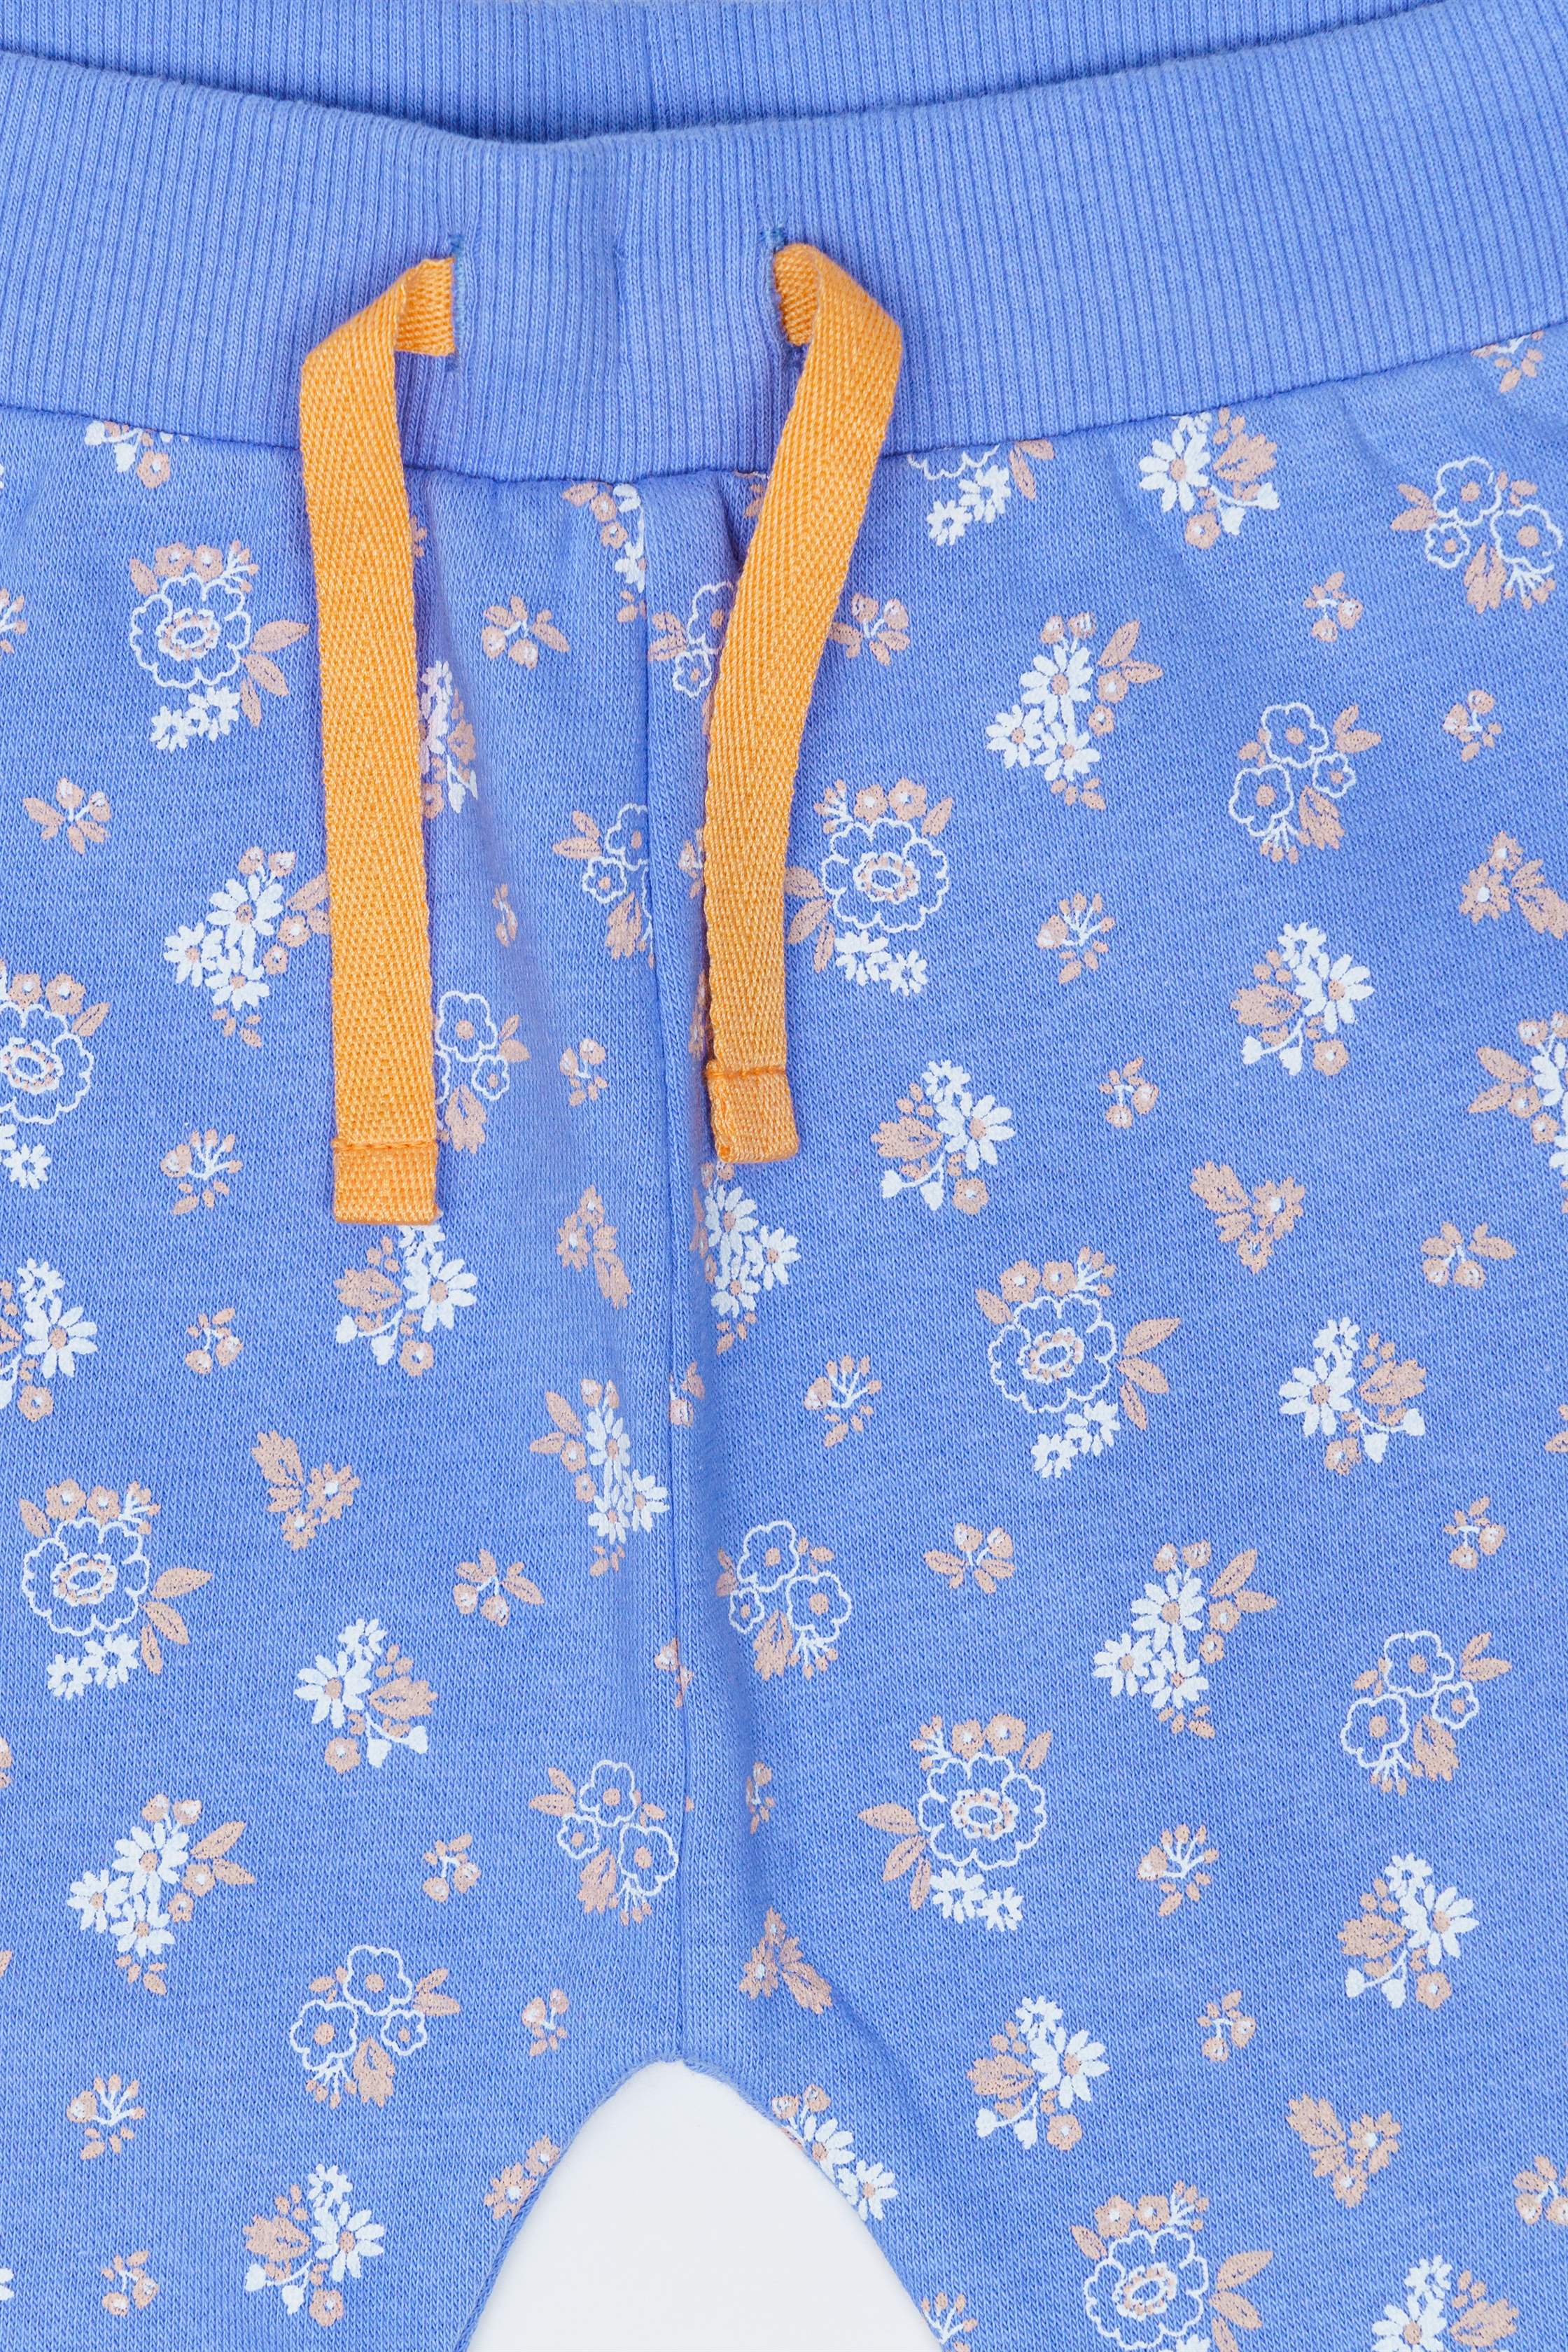 H by Hamleys Infant Girls Printed Blue Joggers